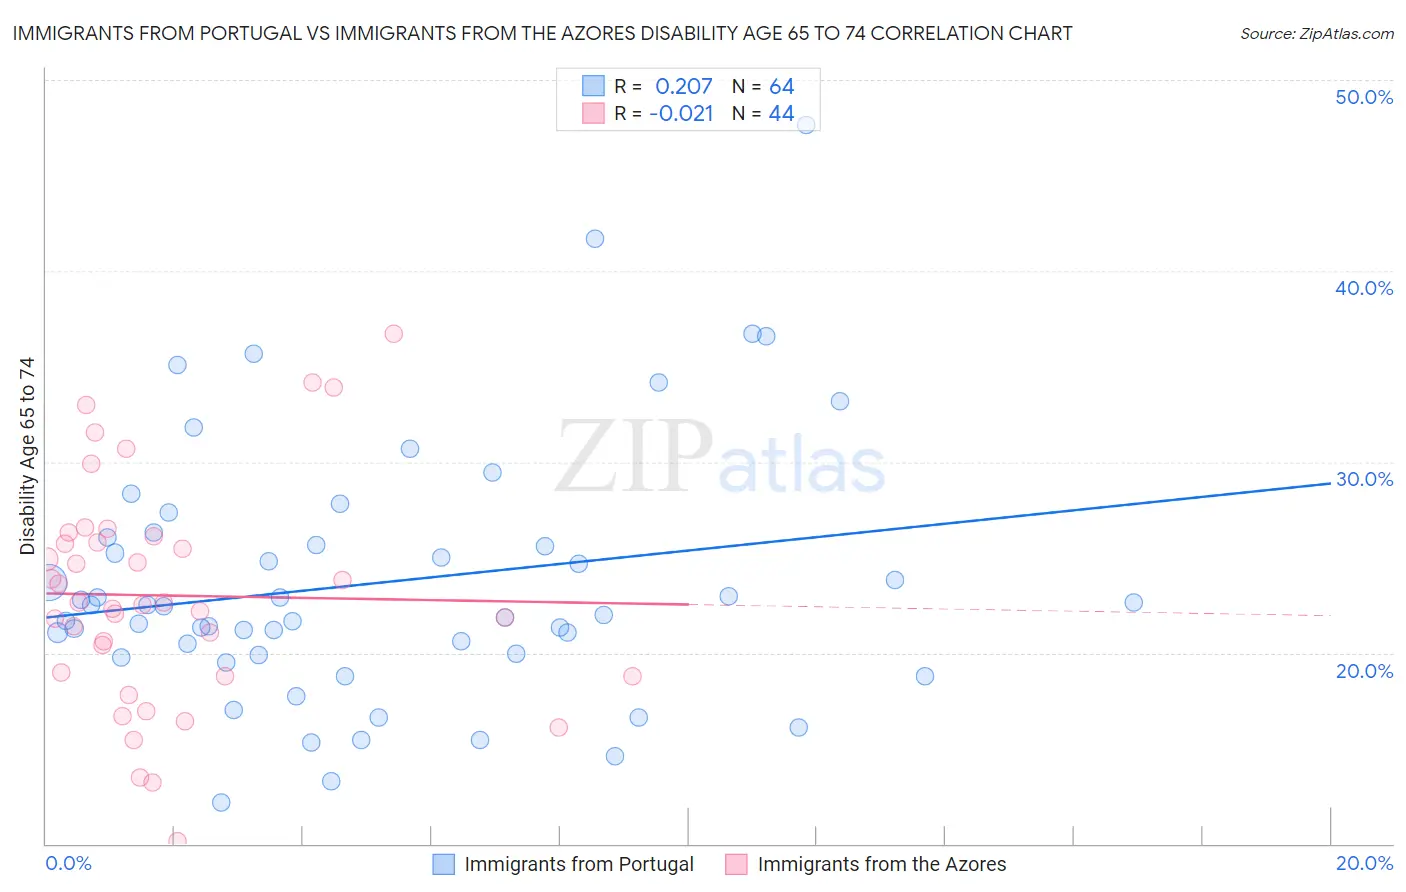 Immigrants from Portugal vs Immigrants from the Azores Disability Age 65 to 74